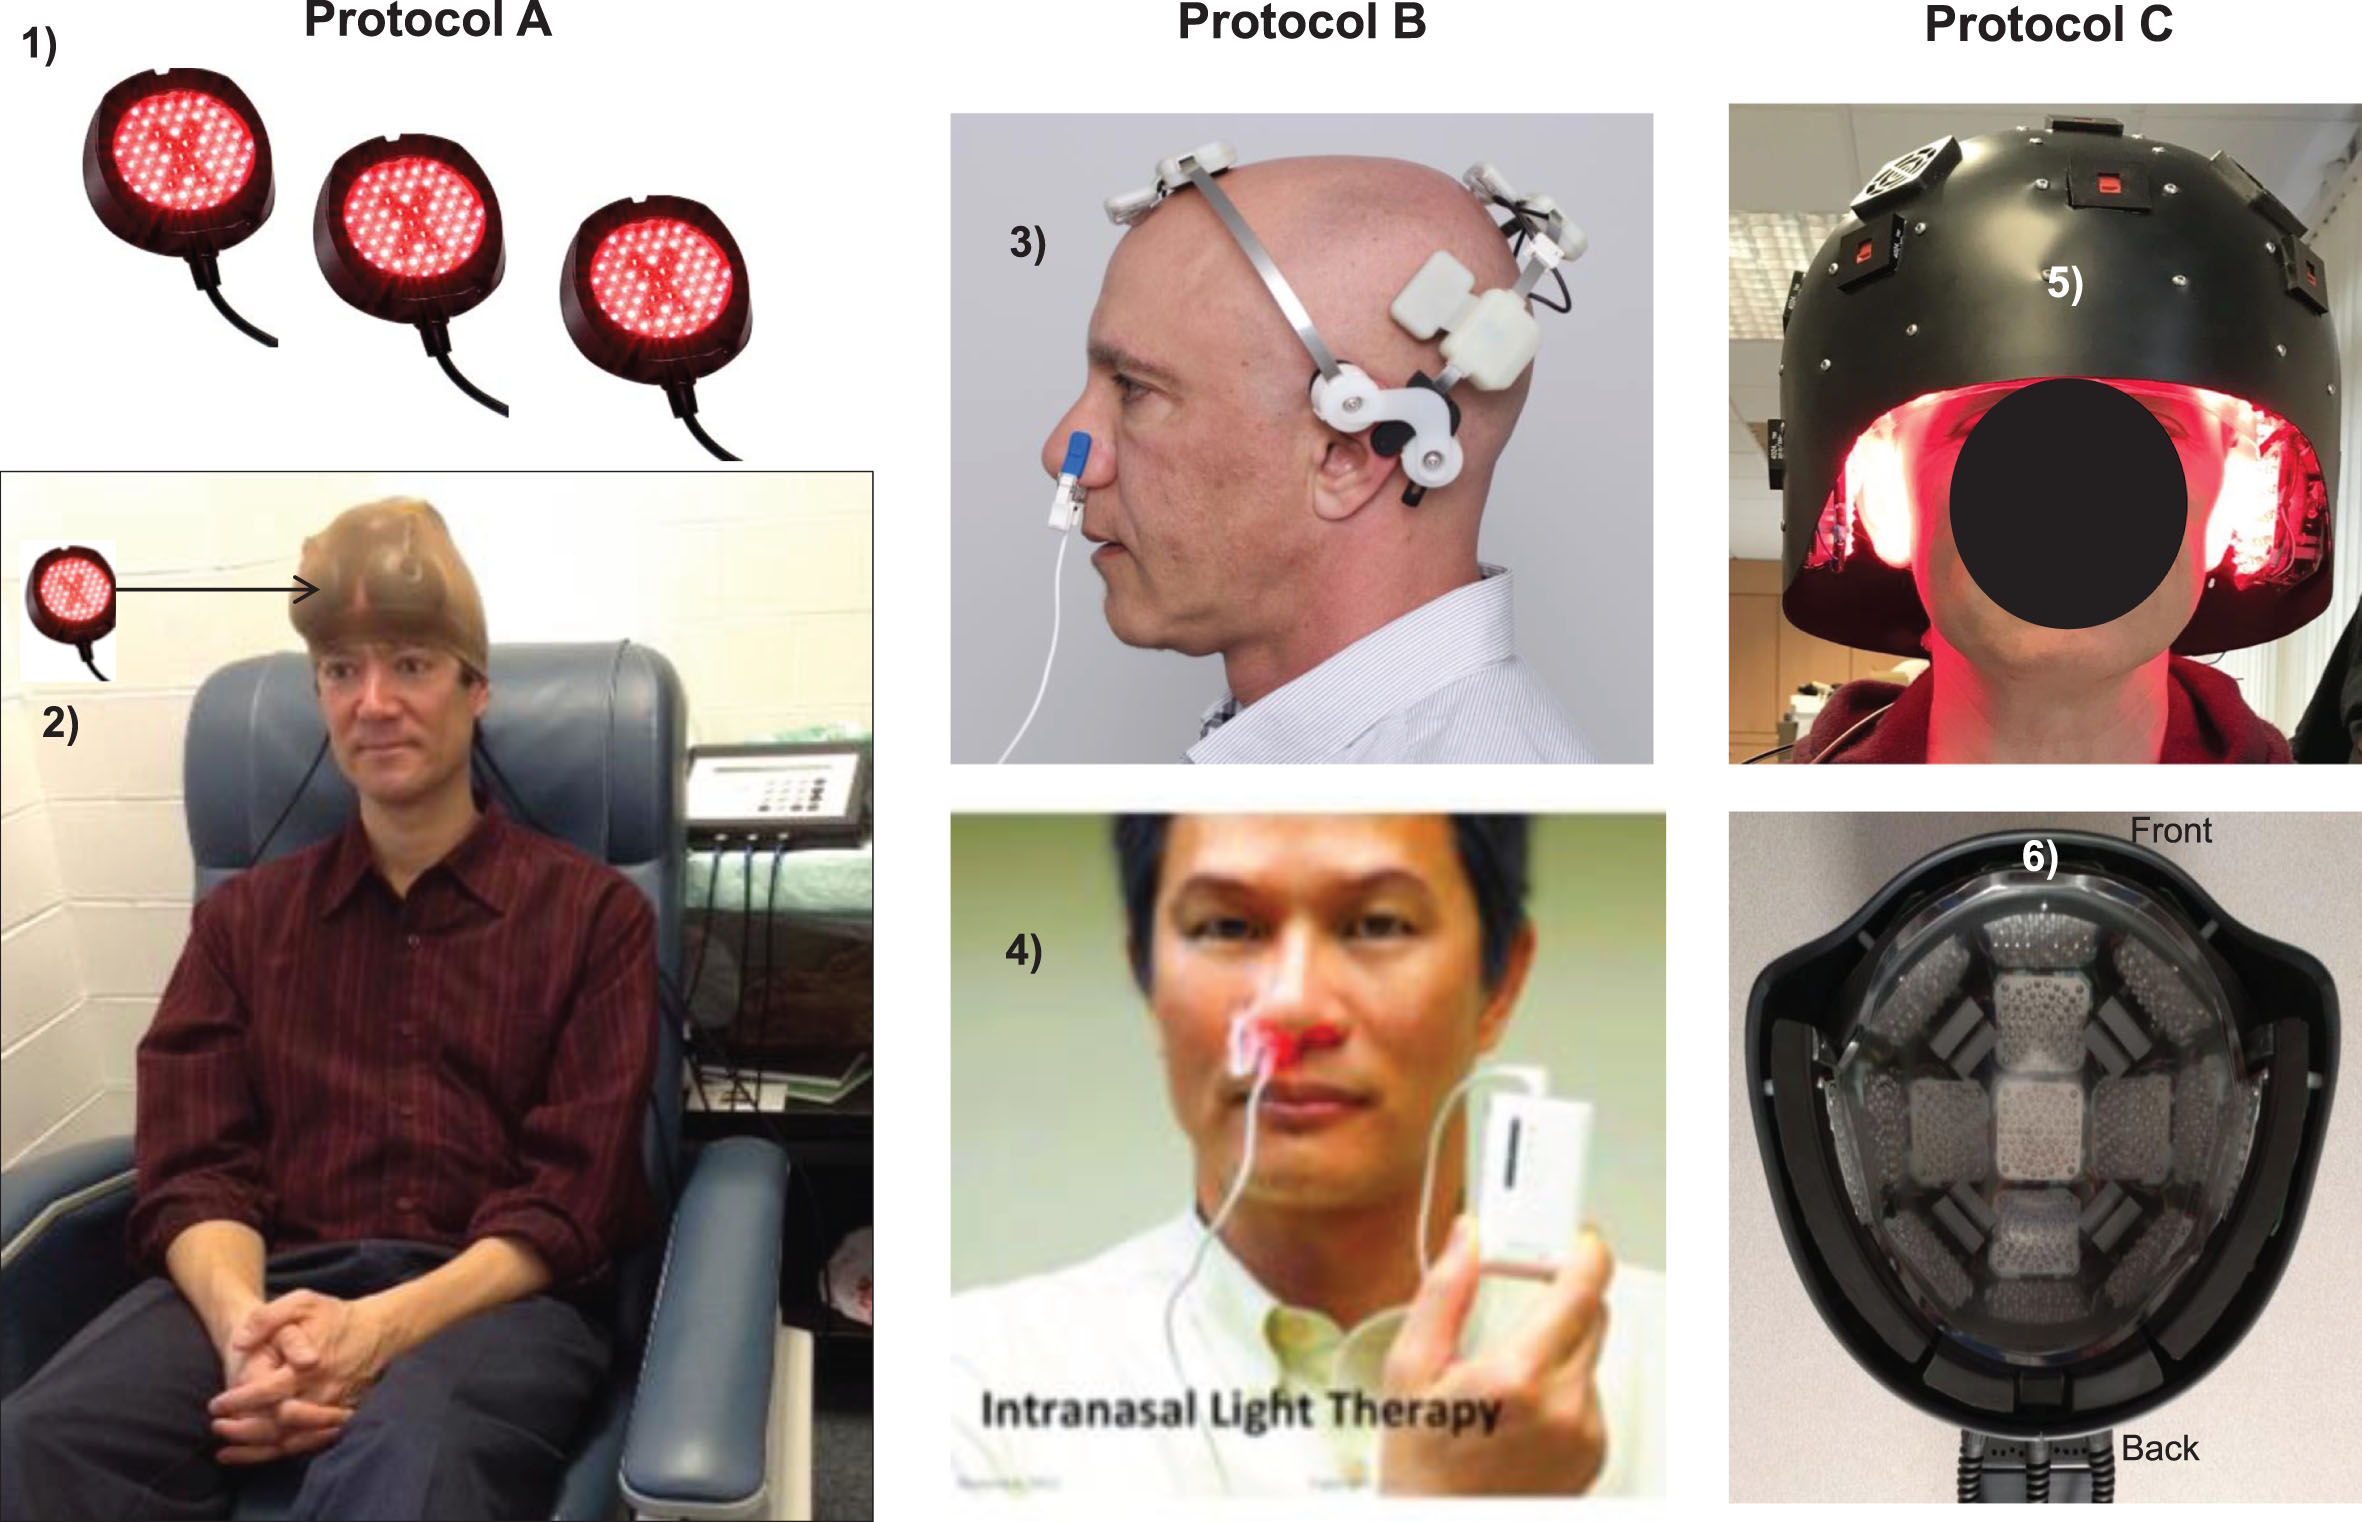 LED devices used for tPBM Protocols A, B, and C. Protocol A: In-office treatments with red/NIR, LED cluster heads (1); two sets of six, LED cluster heads were held in place with a soft, breathable, nylon cap (arrow, 2), MedX Health, Inc., Canada. Supplementary Table 2 lists all LED parameters. Protocol B: At-home treatments with single, NIR diodes (810 nm, pulsed 40 Hz) placed on scalp only over cortical nodes, Default Mode Network, including a single, NIR intranasal applicator directed towards olfactory bulbs to indirectly treat connections with hippocampal areas (3), Neuro Gamma device; plus a separate, red intranasal diode (4), Vielight, Inc., Canada. Not necessary to shave the head. Additional home treatment information is in Supplementary Text Material 2. Protocol C: In-office treatment with a helmet (5), lined with red/NIR, LED cluster heads placed in rows inside the helmet (6), THOR Photomedicine, Ltd., UK. NIR, near-infrared. Permissions: Protocol A, (2) reprinted with authors’ permission from [59]. Protocol B, (3) and (4) reprinted with permission from Vielight, Inc., in the public domain.